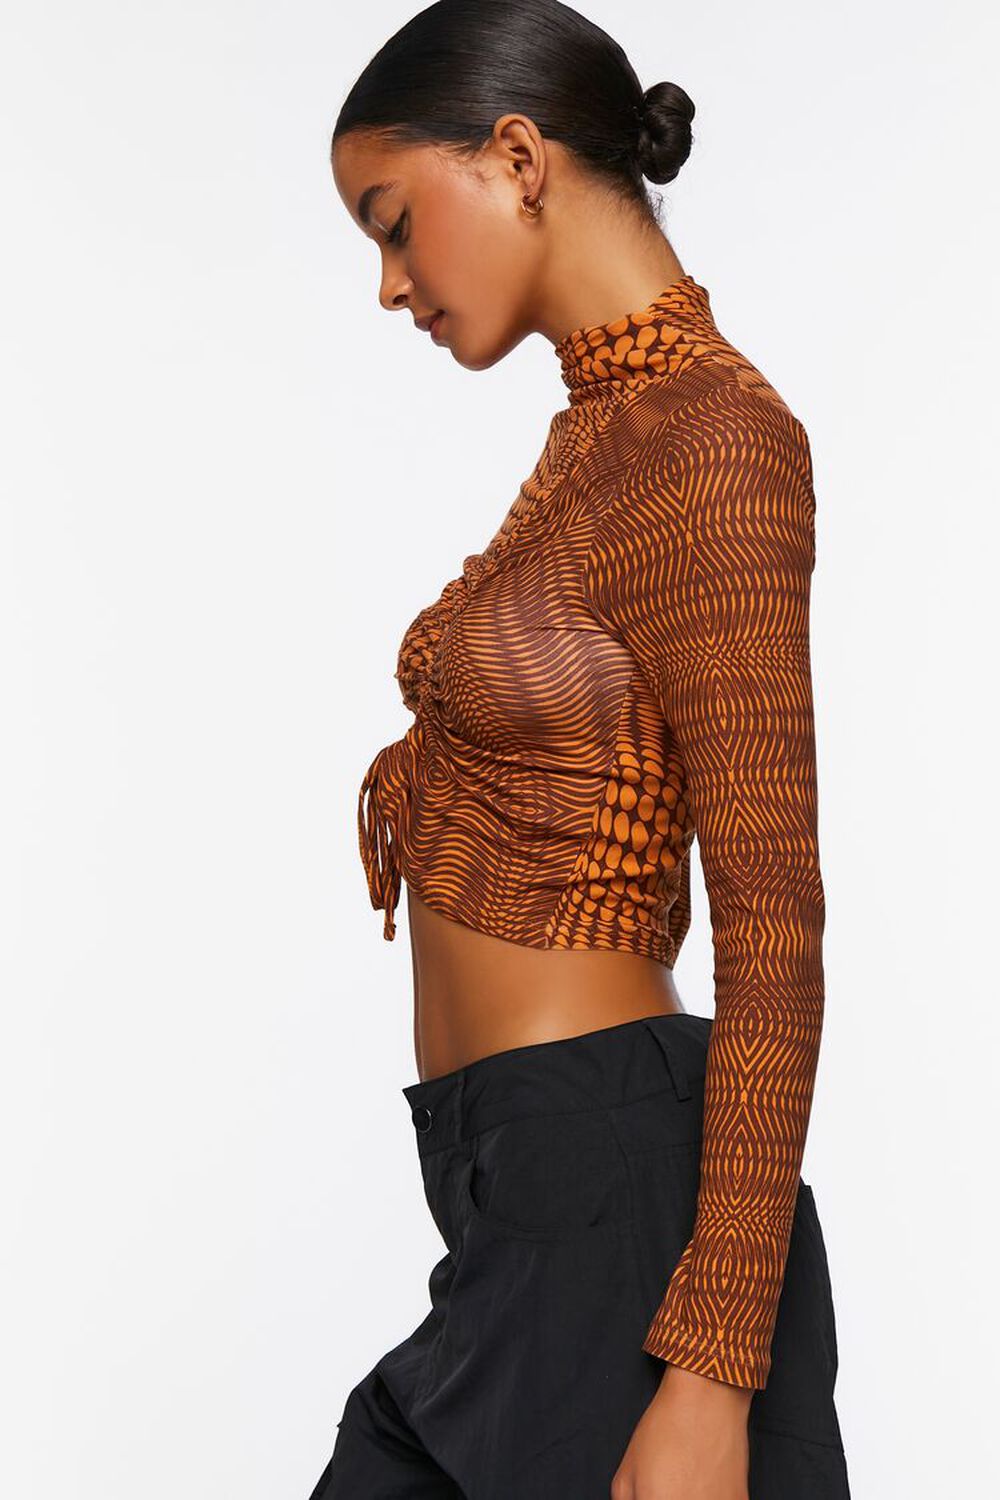 Abstract Print Ruched Crop Top, image 2